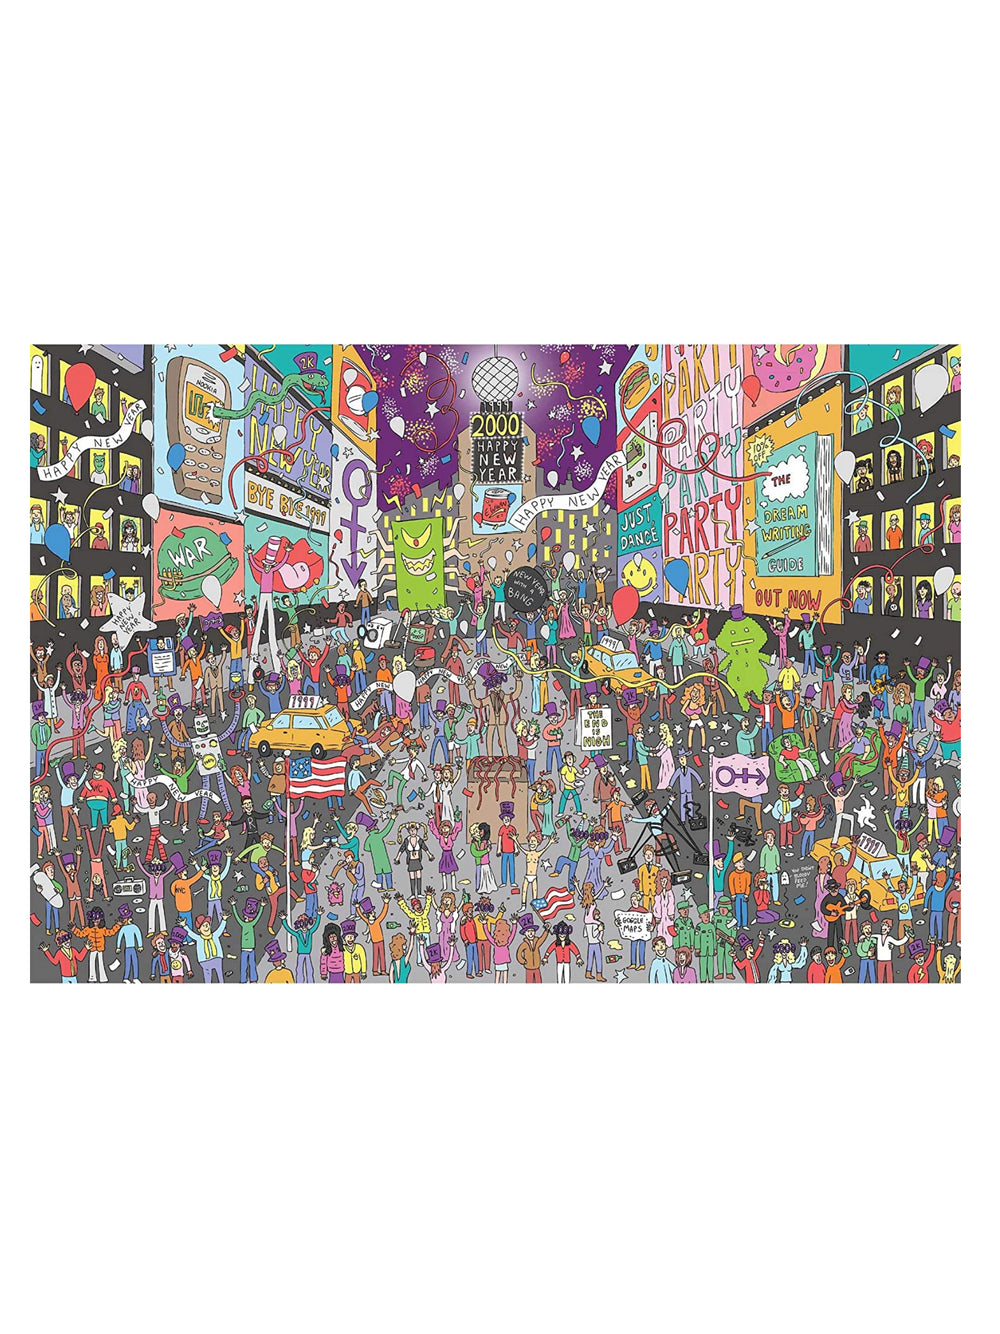 Where's Prince? Prince in 1999 : 500 Piece Jigsaw Puzzle Brand New Boxed